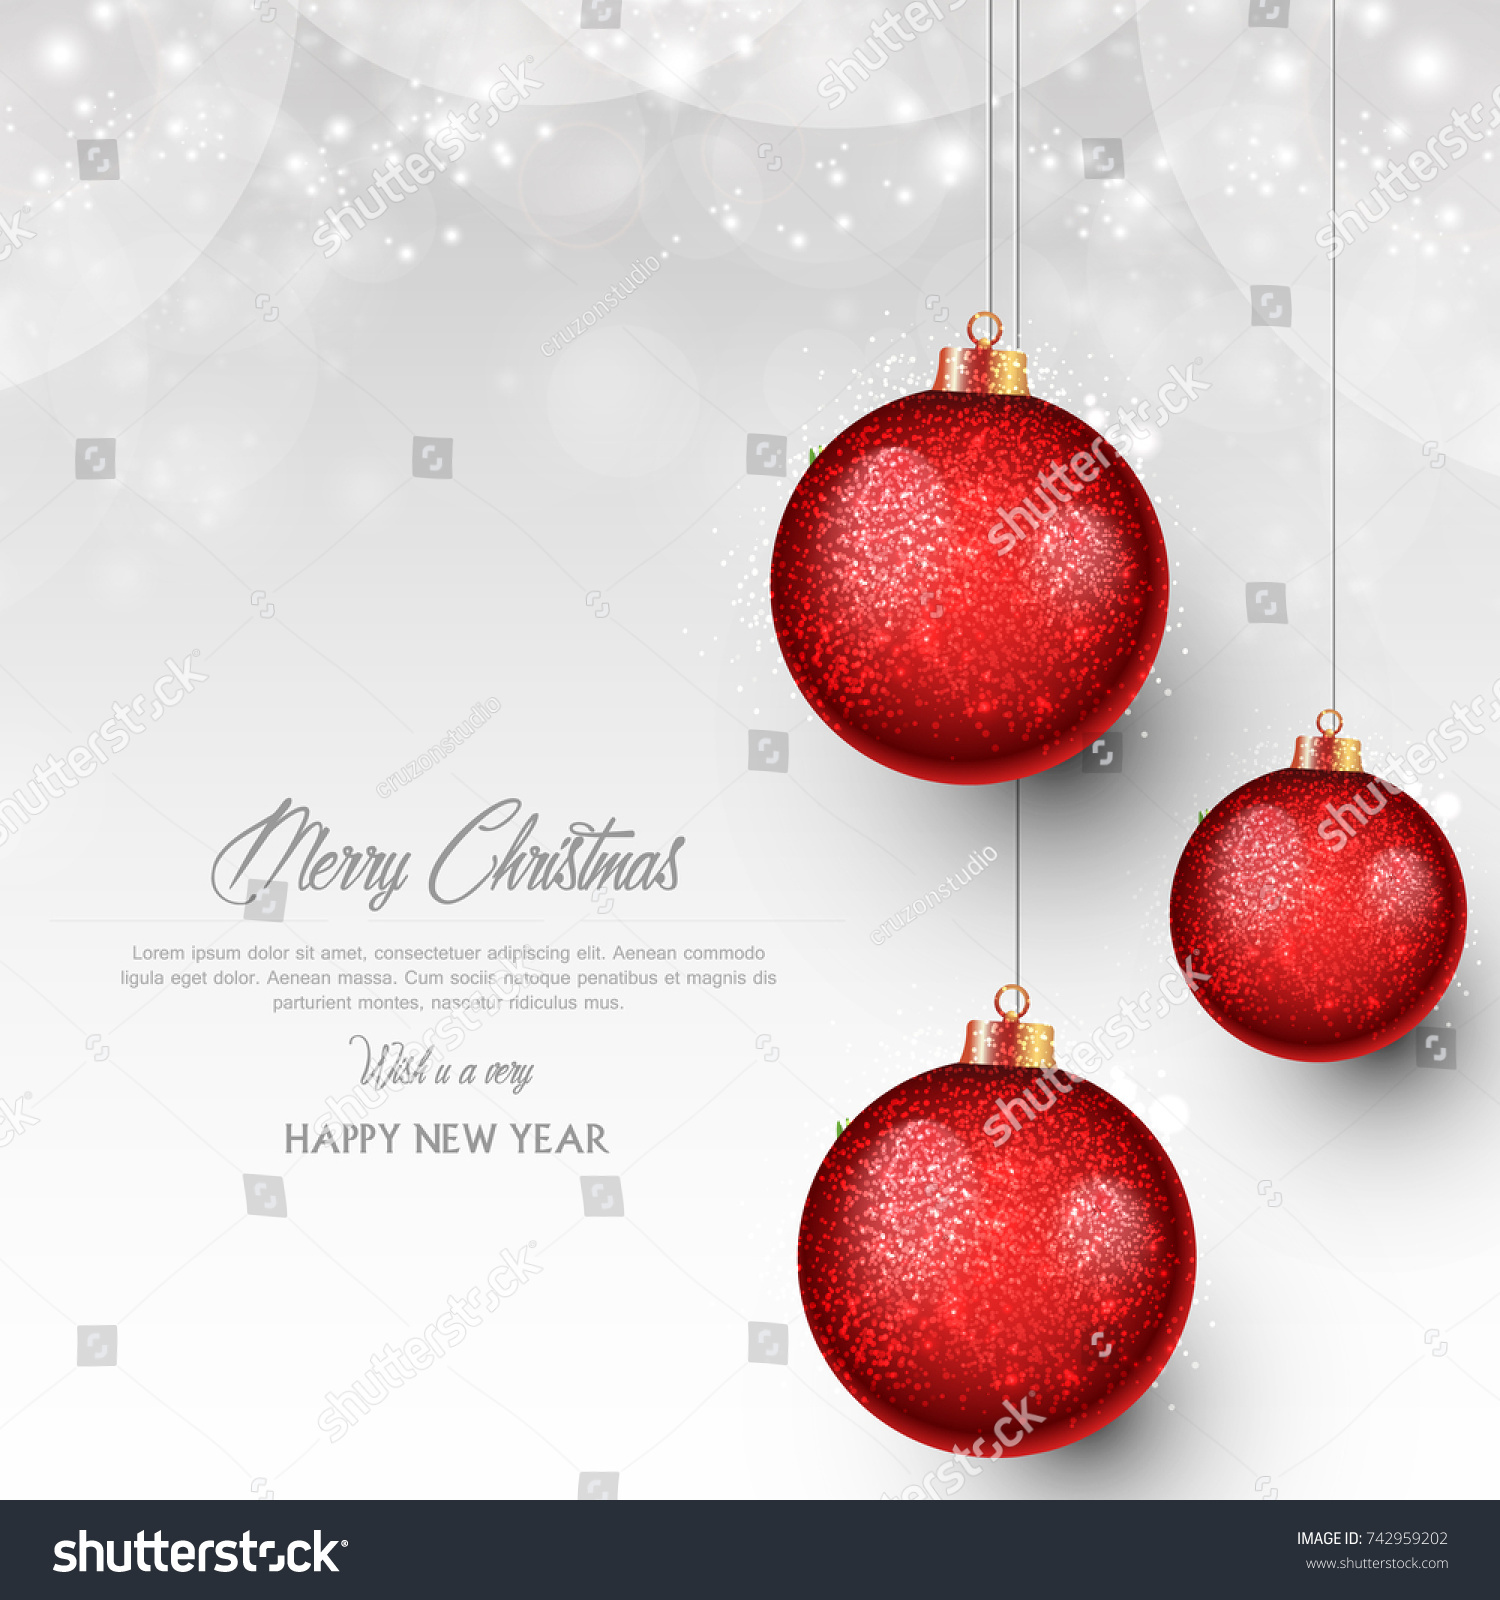 Christmas Greeting Card. Merry Christmas lettering with Christmas tree, vector illustration. #742959202